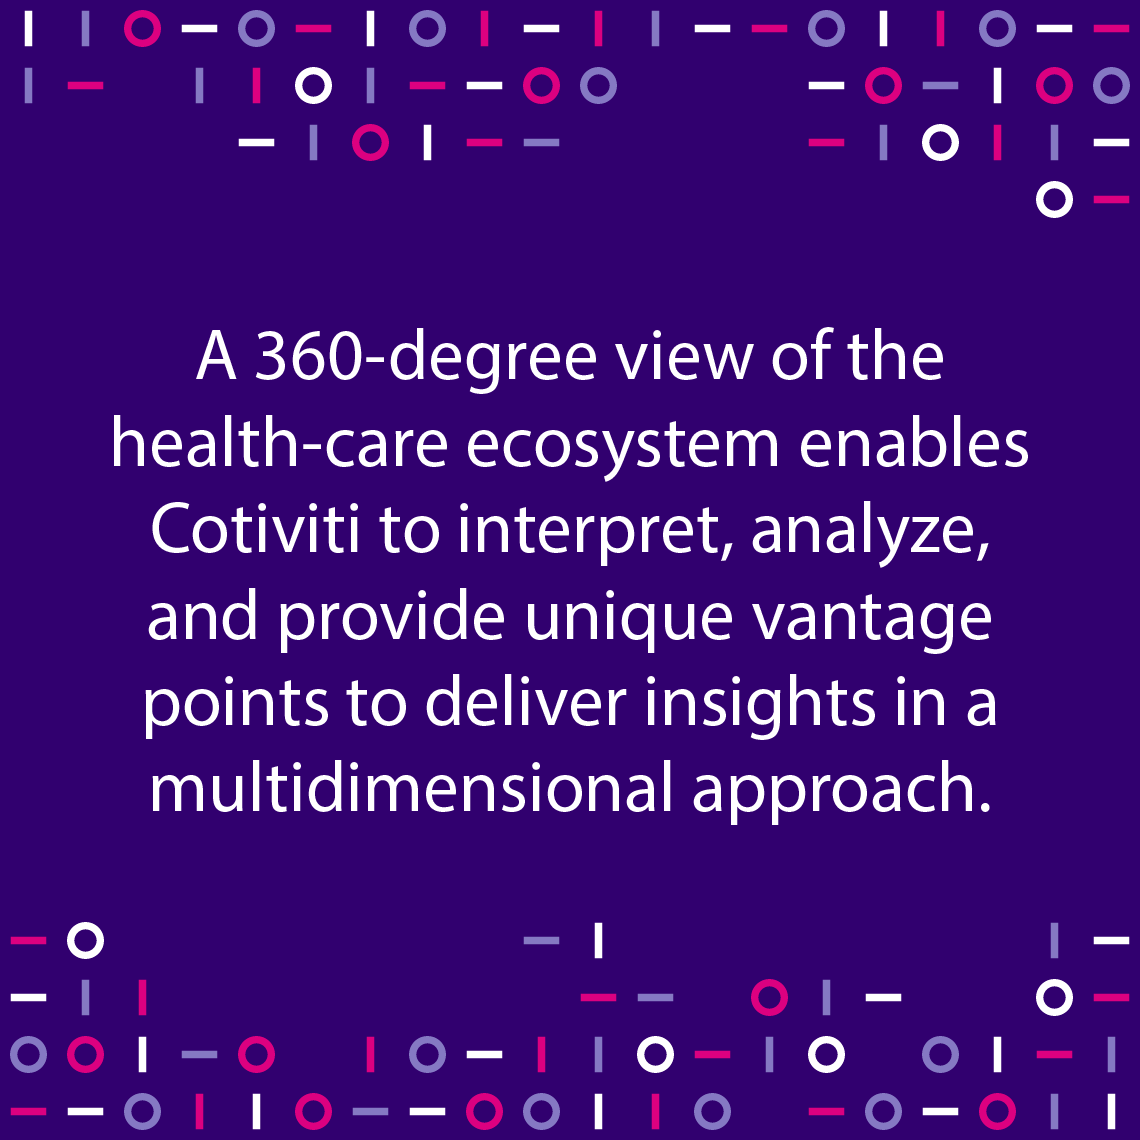 A 360-degree view of the health-care ecosystem enables Cotiviti to interpret, analyze, and provide unique vantage points to deliver insights in a multidimensional approach.